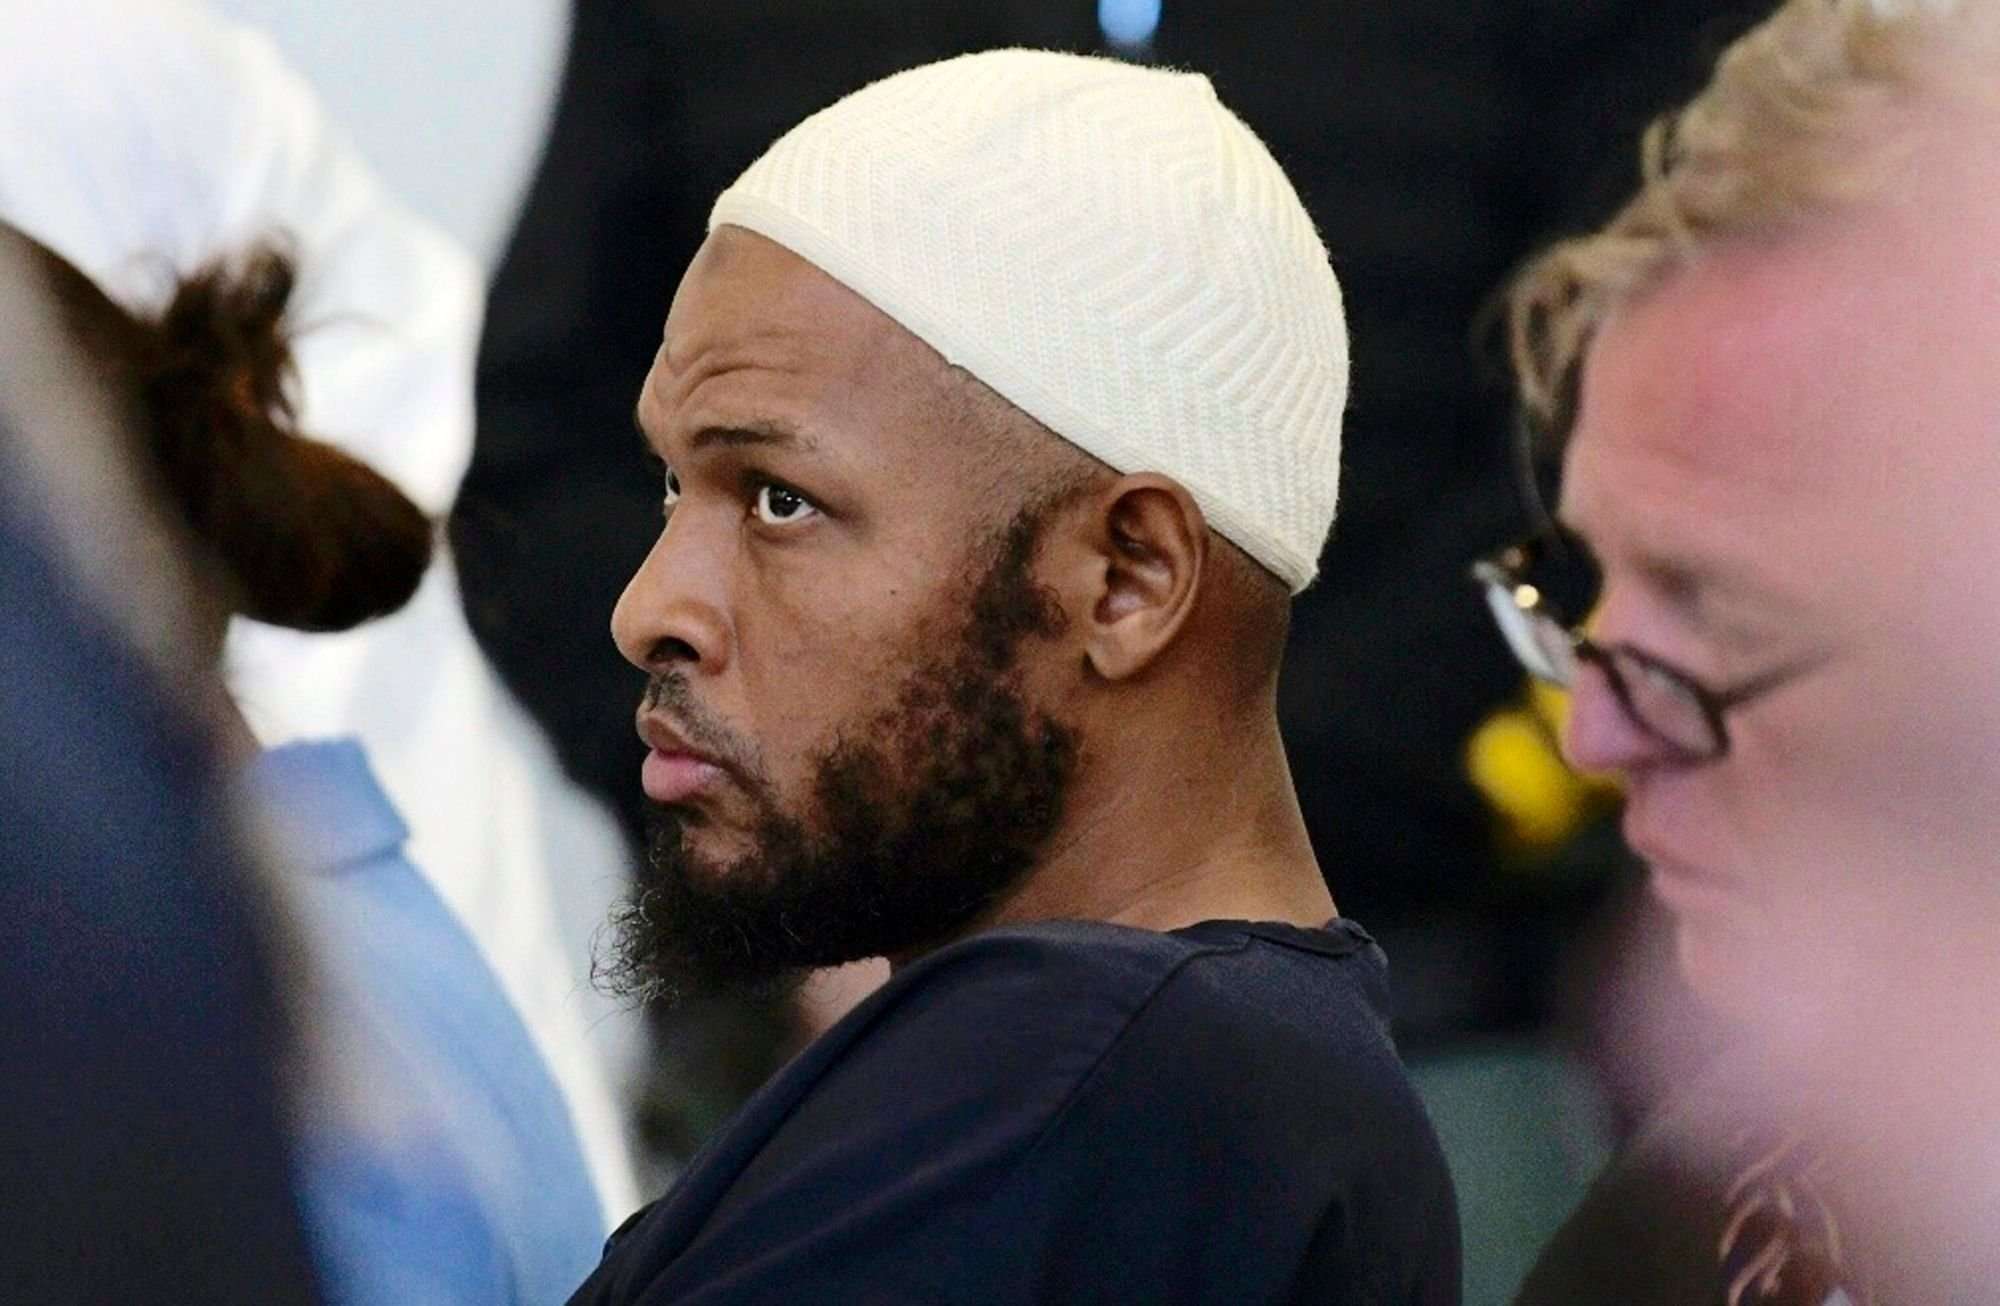 image for 3-Year-Old-Boy Denied Medication at New Mexico Compound Where His Body Was Found, Prosecutors Say